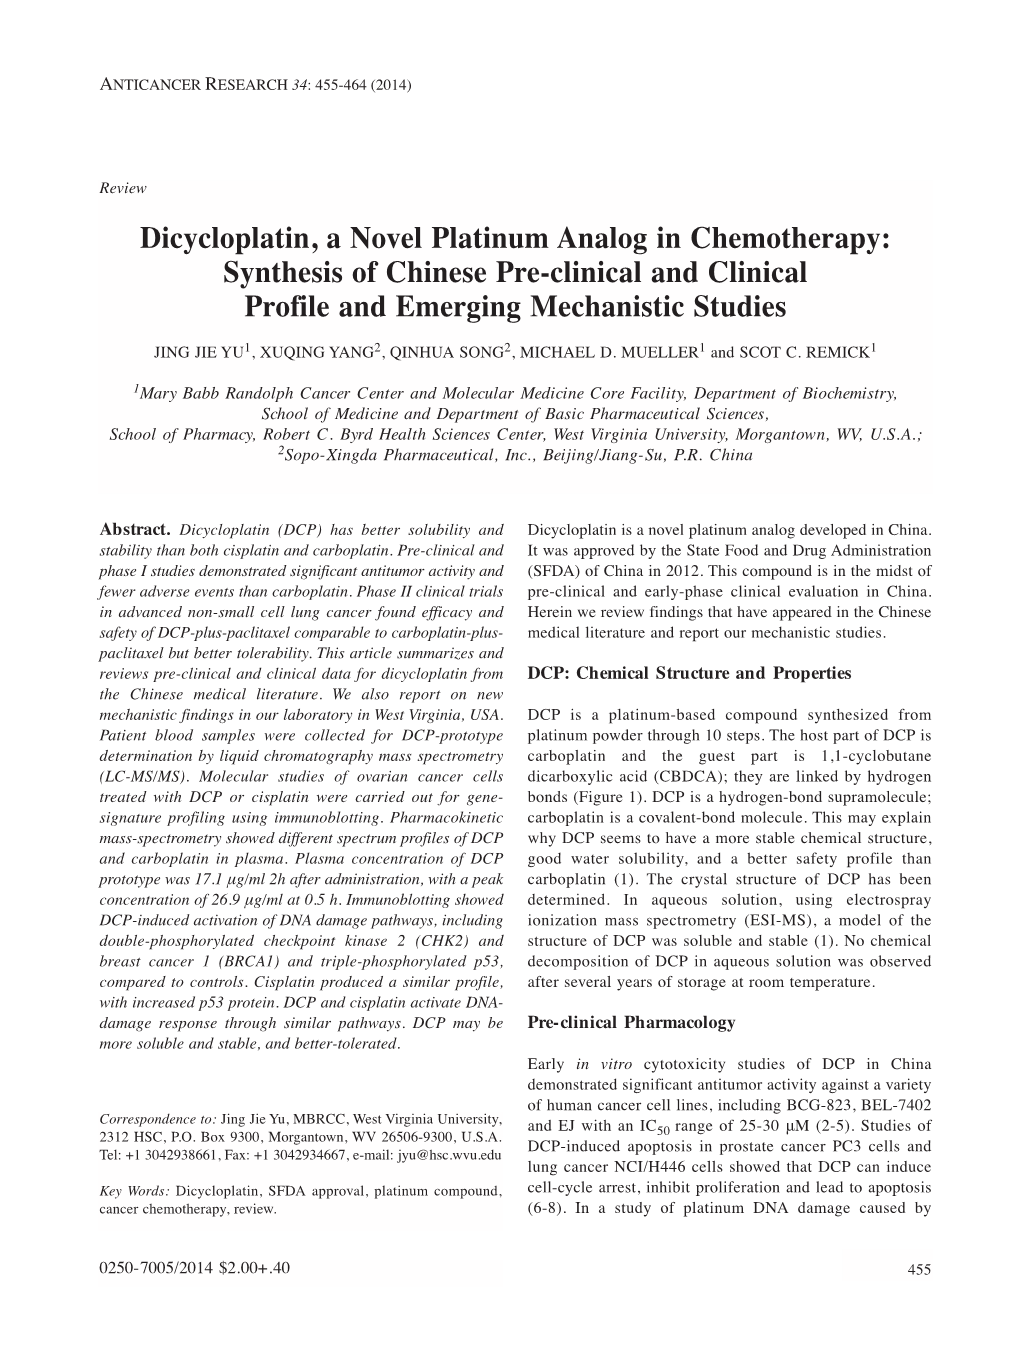 Dicycloplatin, a Novel Platinum Analog in Chemotherapy: Synthesis of Chinese Pre-Clinical and Clinical Profile and Emerging Mechanistic Studies